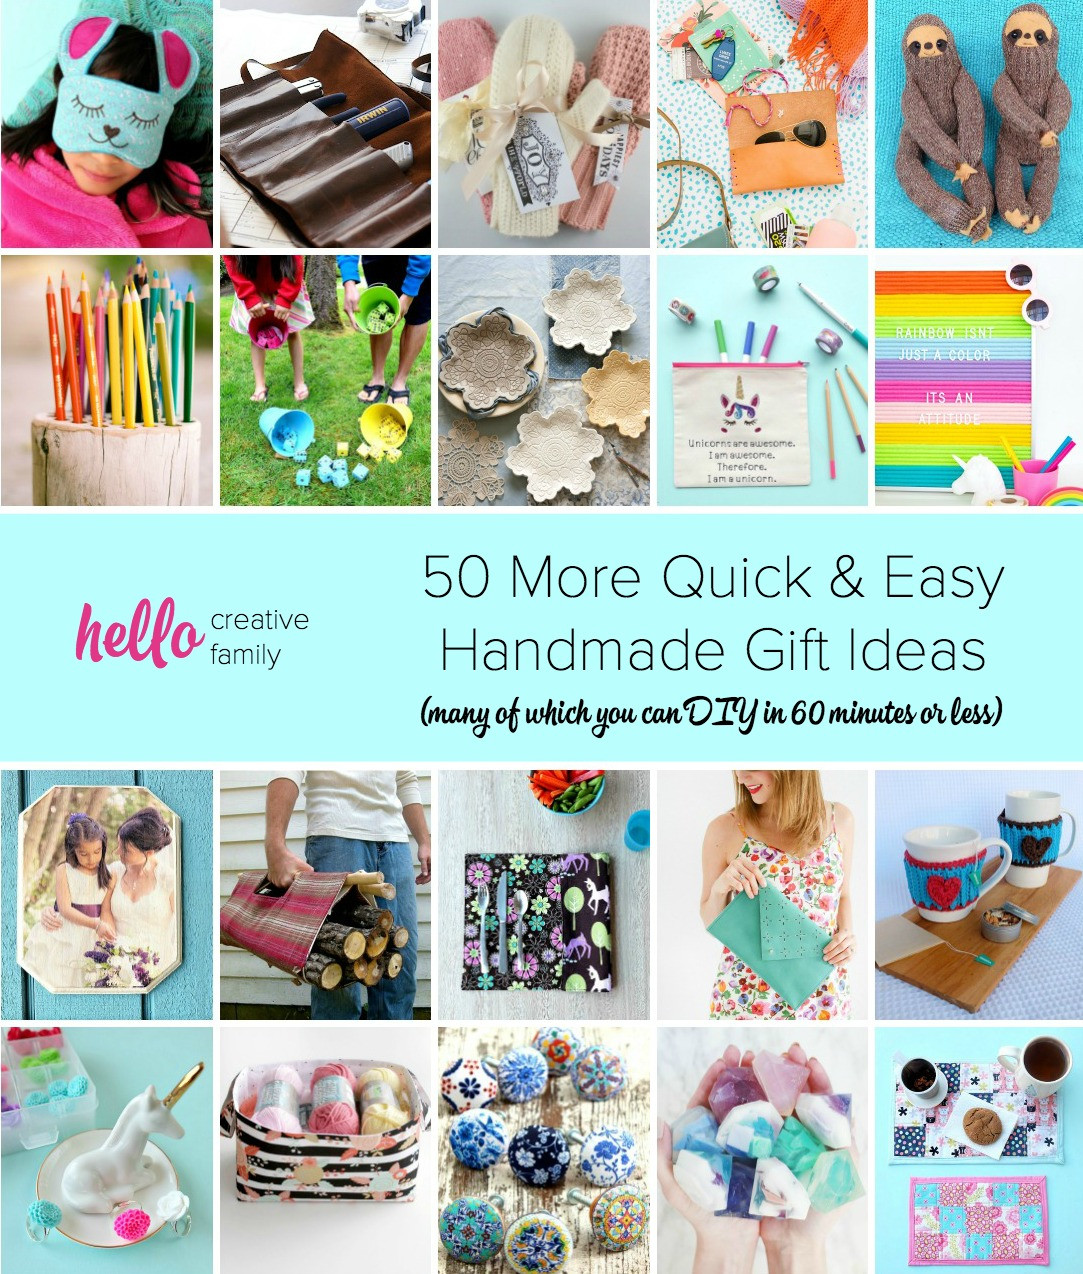 Fast Birthday Gift Ideas
 50 Last Minute Handmade Gifts You Can DIY in 60 Minutes